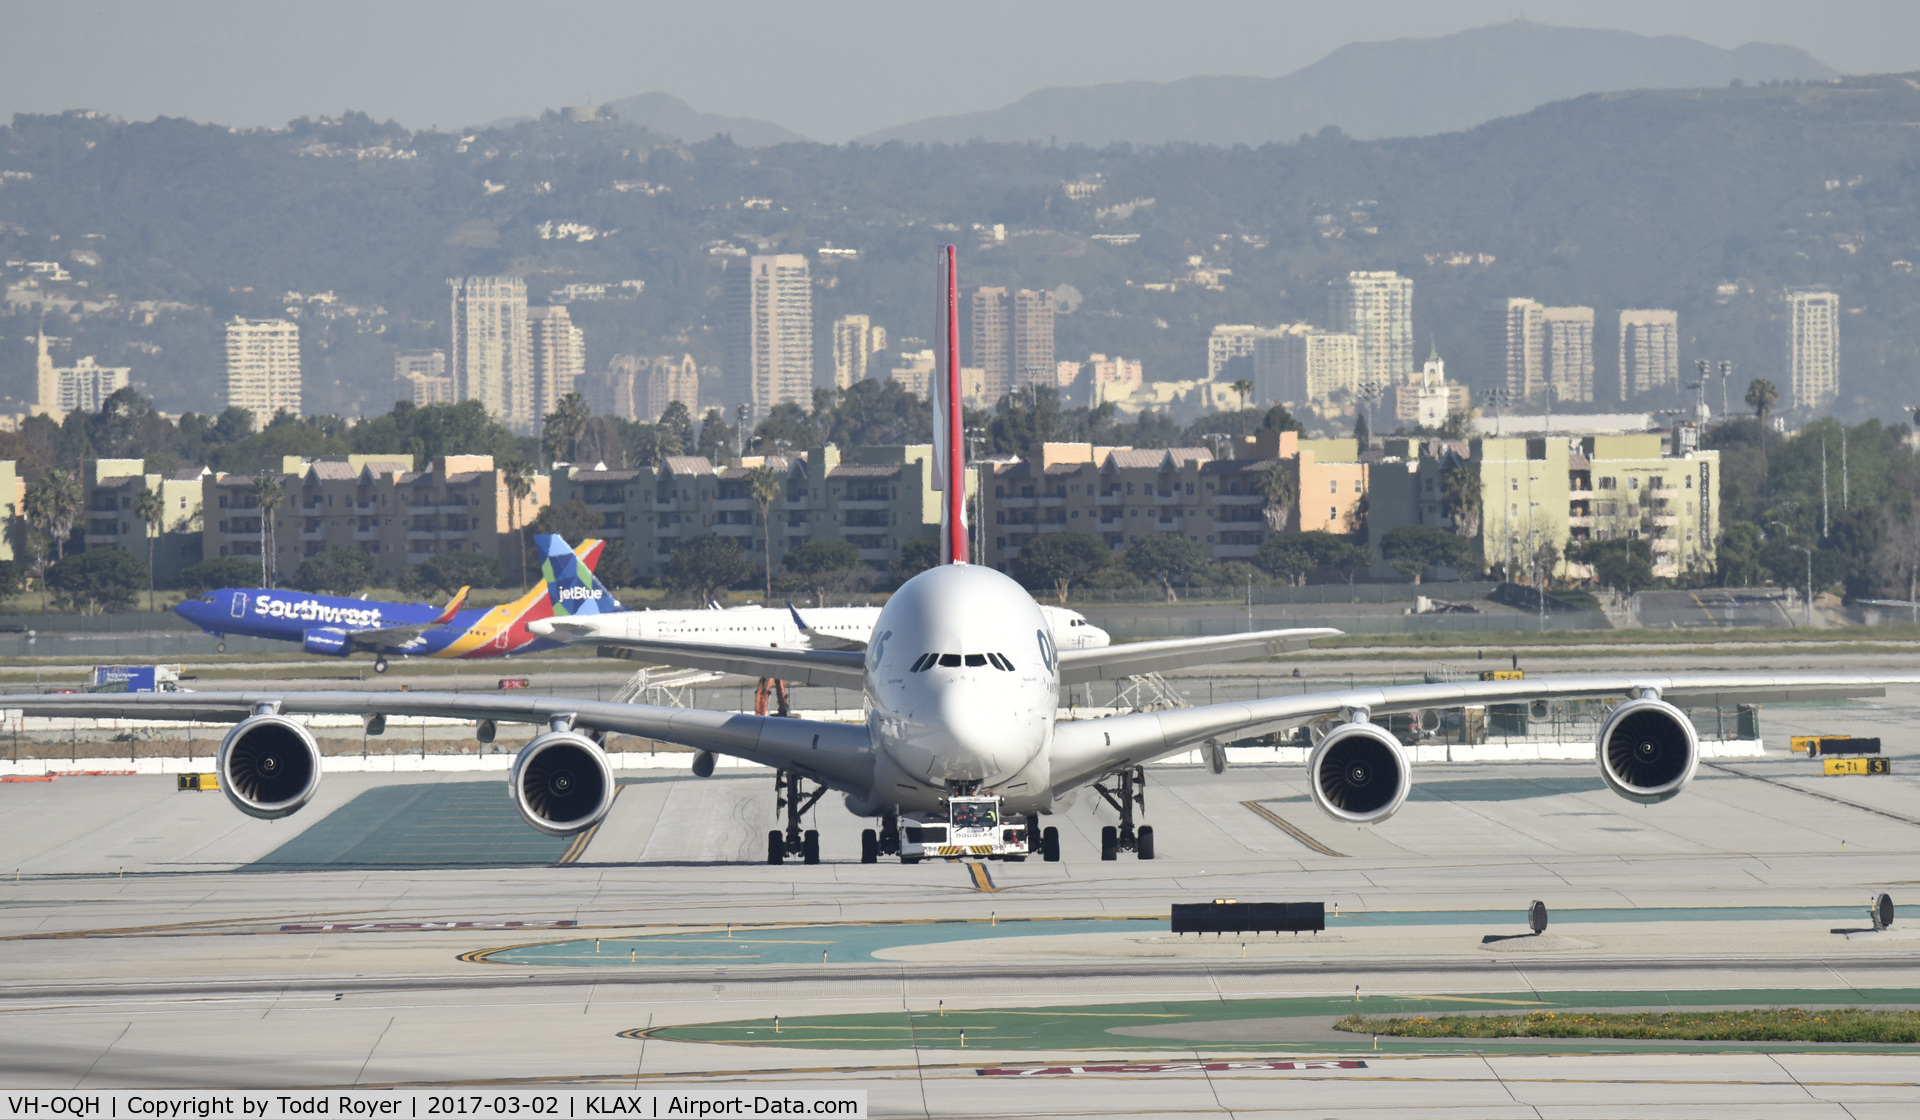 VH-OQH, 2009 Airbus A380-842 C/N 050, Getting towed to parking at LAX